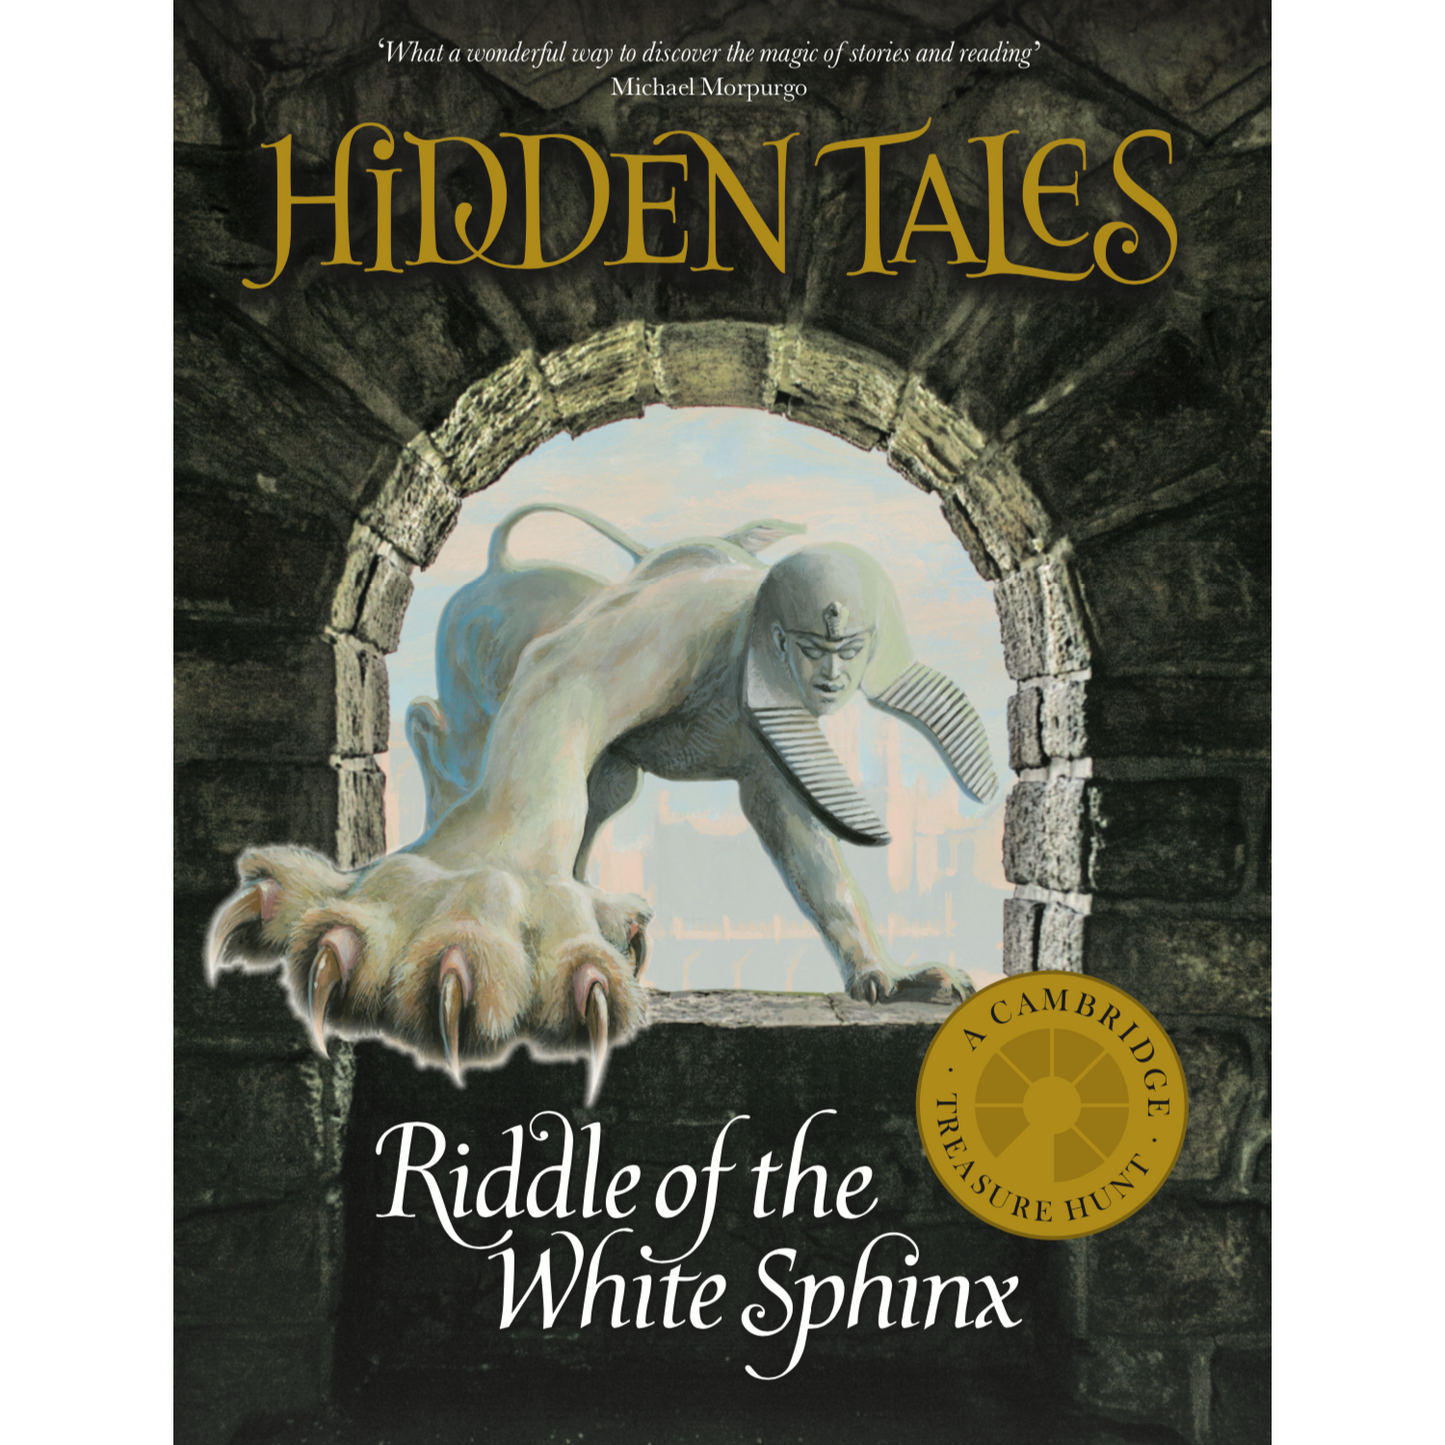 Hardcover book - Hidden Tales: Riddle of the White Sphinx. A Cambridge Treasure Hunt. Brought to you by CuratingCambridge.com